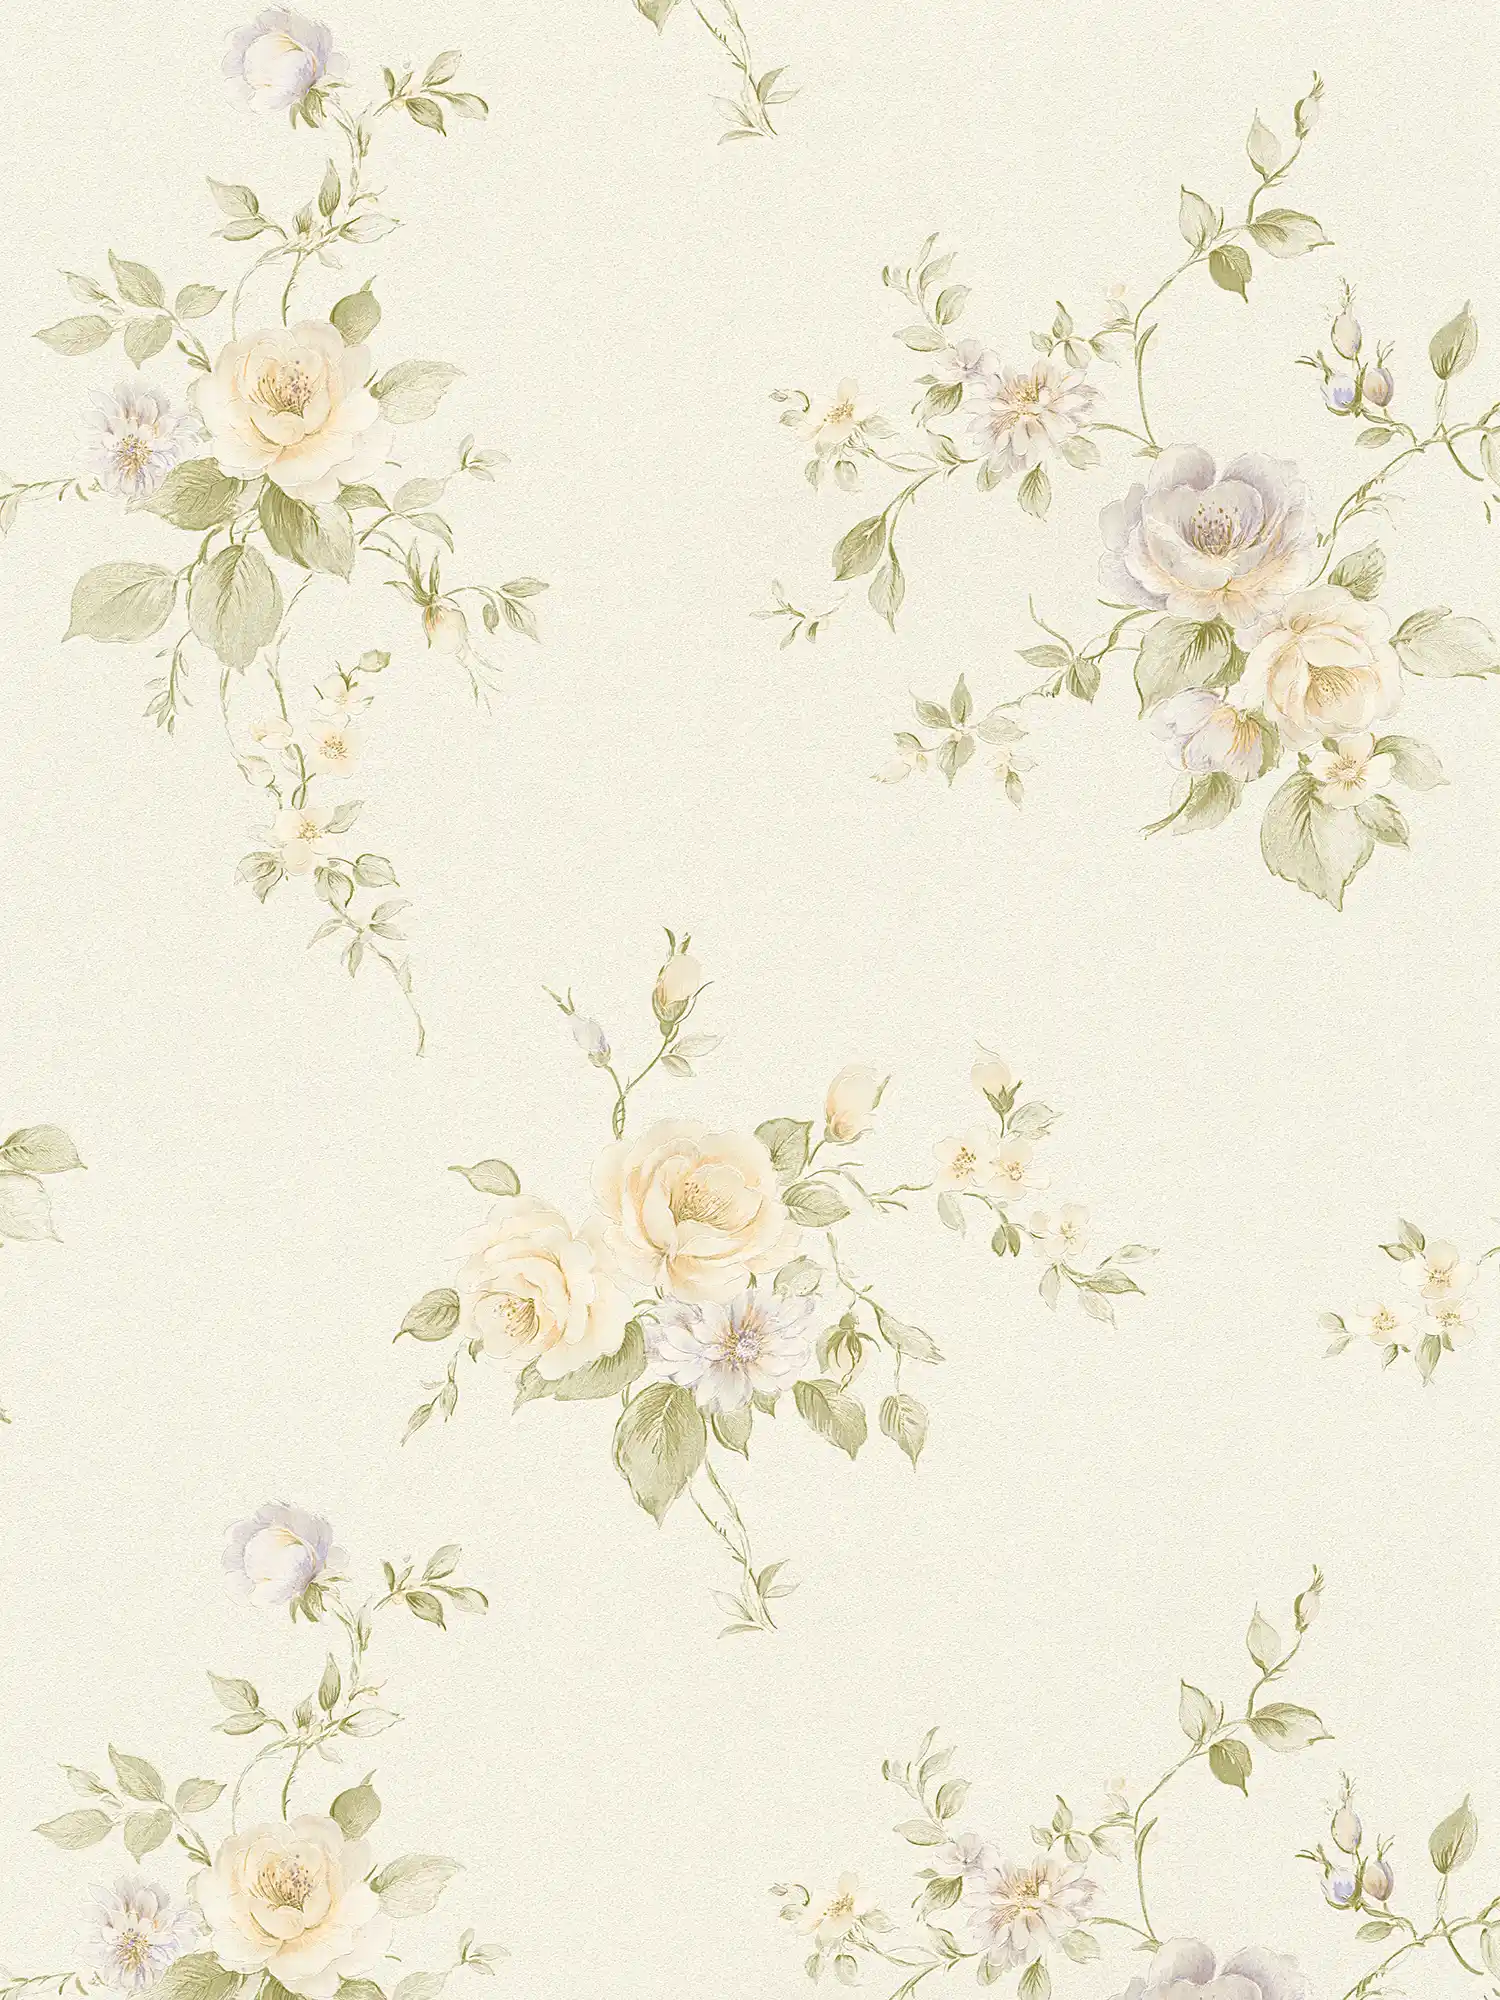 Roses wallpaper with floral ornaments - cream, green, orange
